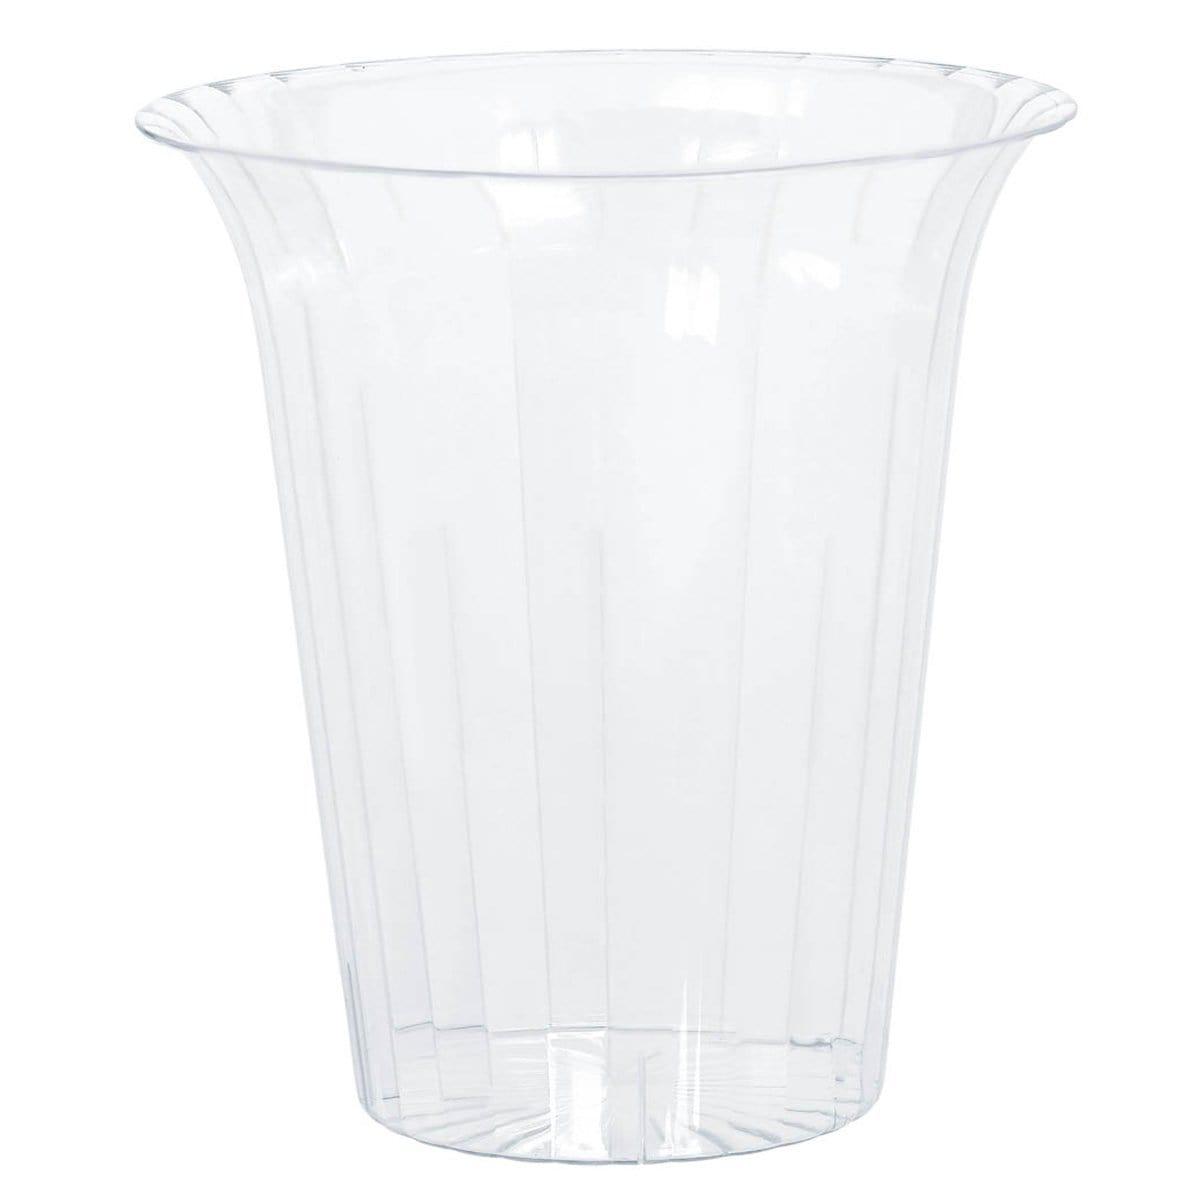 Buy Plasticware Container - Large Flared sold at Party Expert